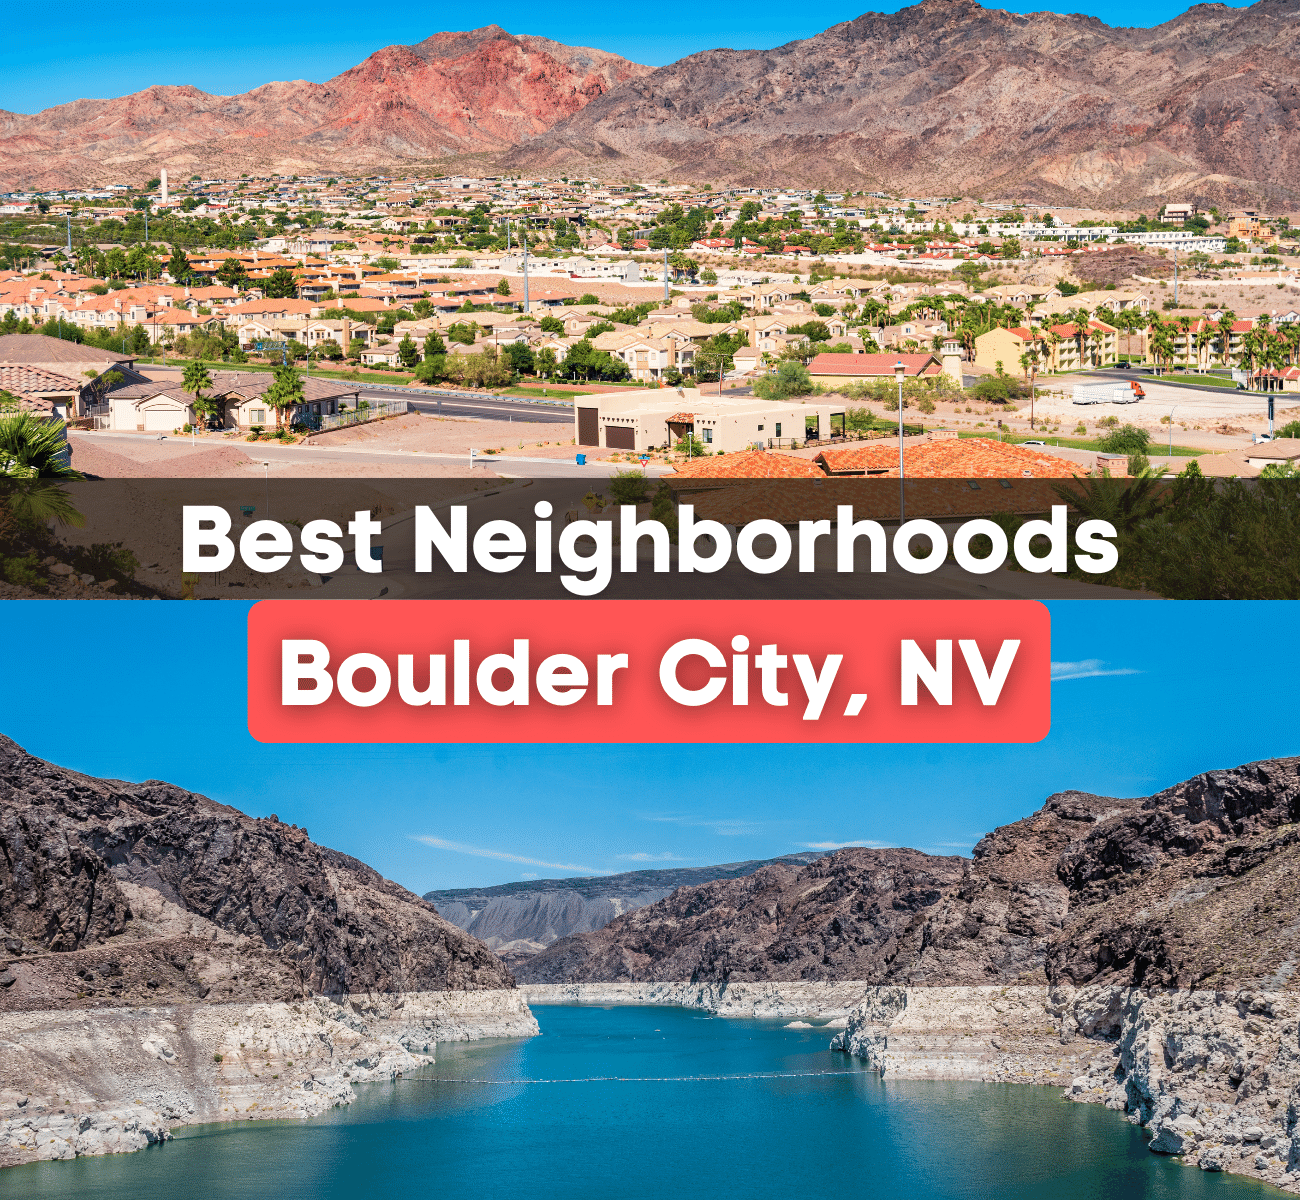 City view of Boulder City, Nevada and the Hoover Dam